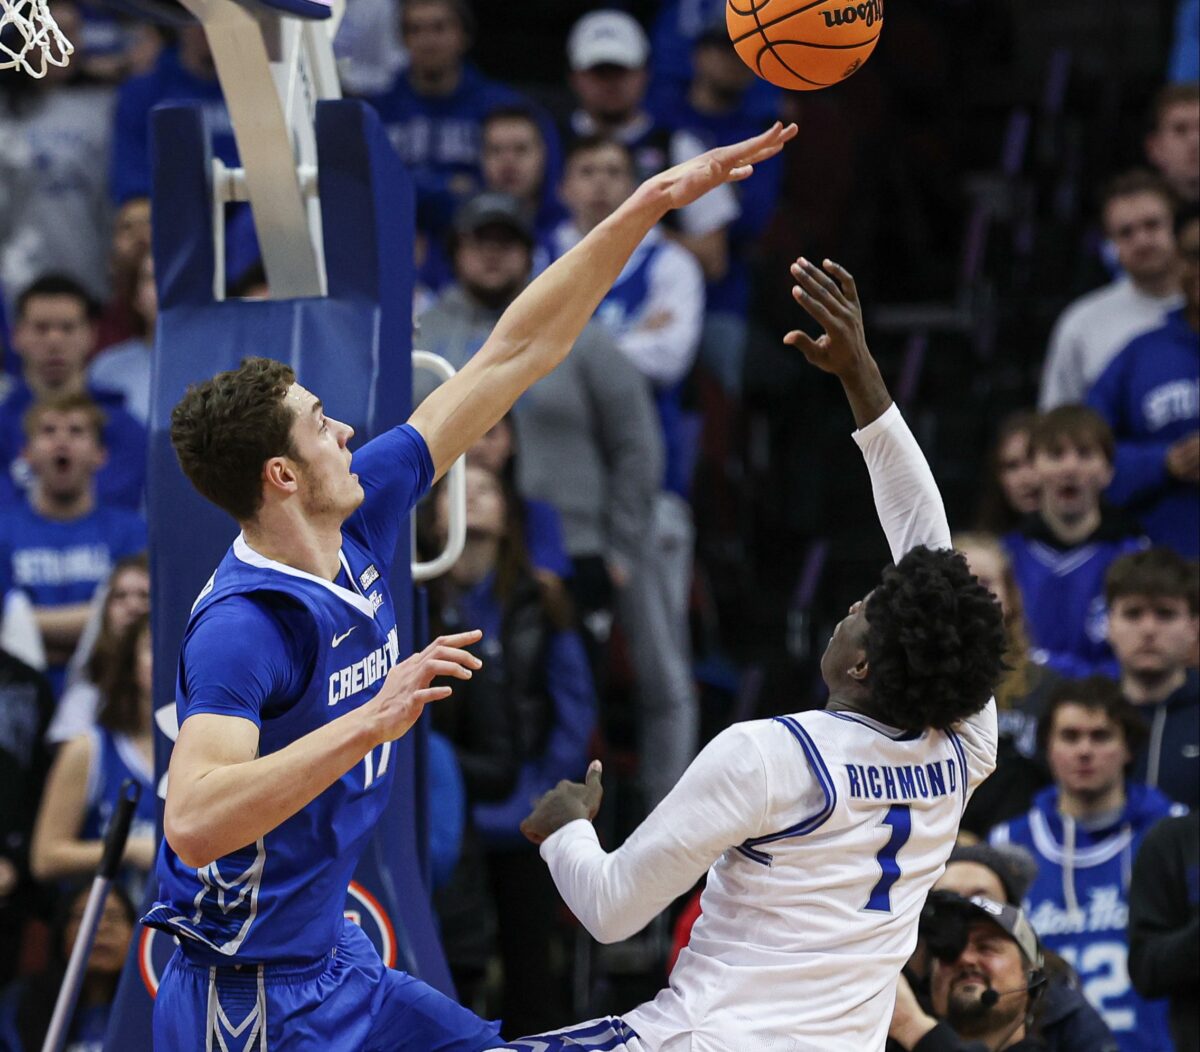 Game of the year? Creighton defeats Seton Hall in triple overtime